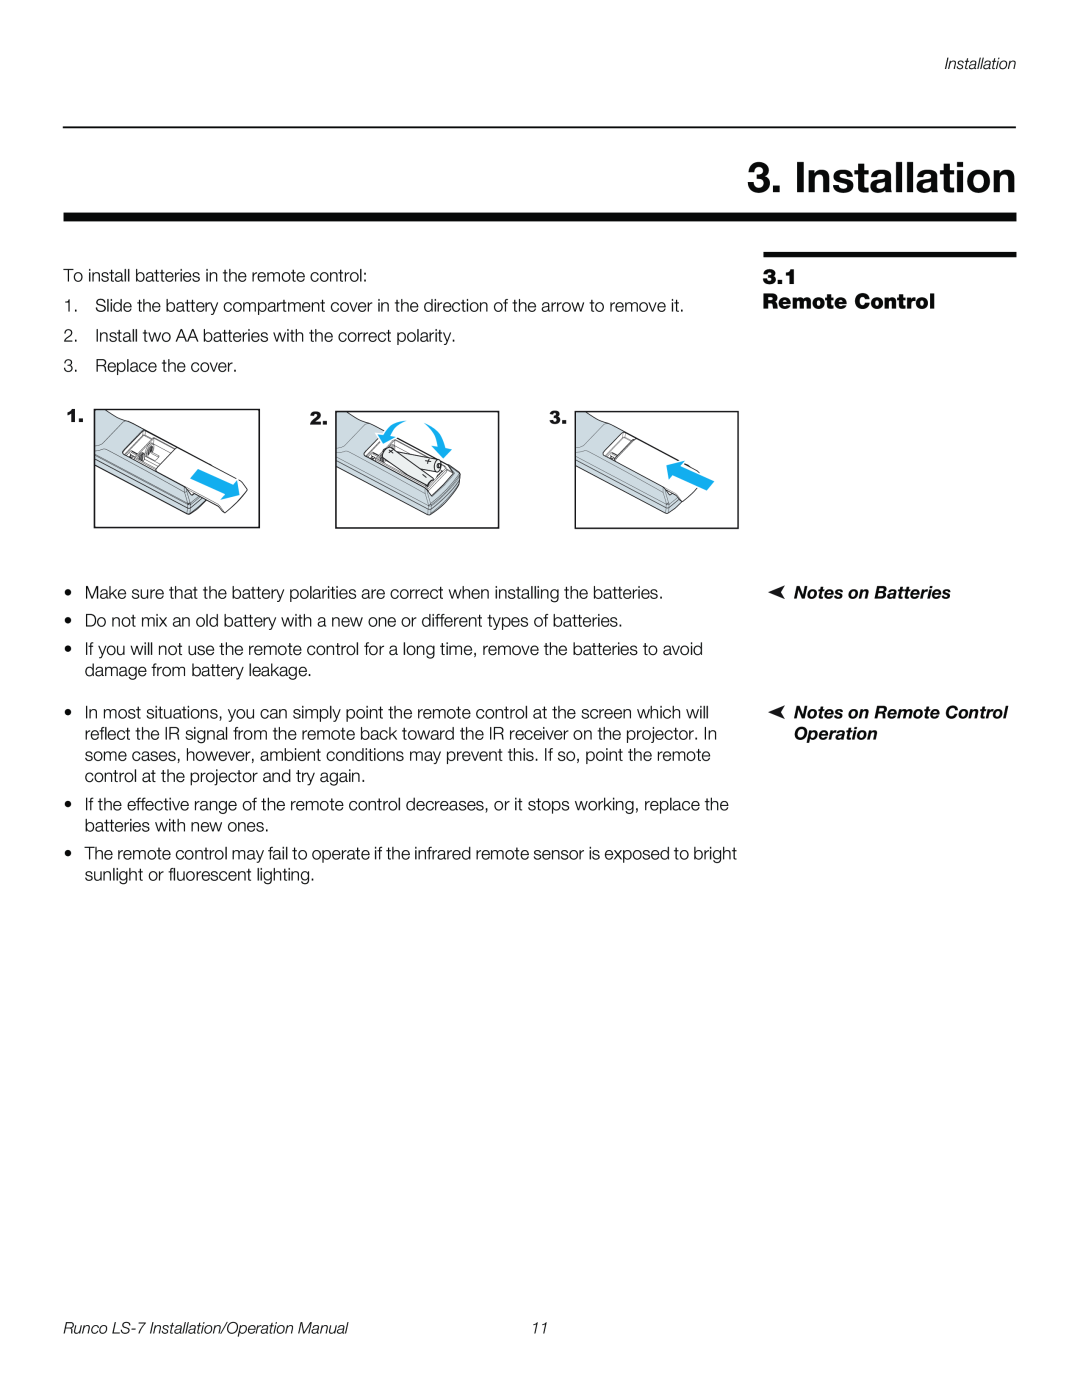 Runco LS-7 operation manual Installation, Notes on Batteries, Notes on Remote Control, Operation 